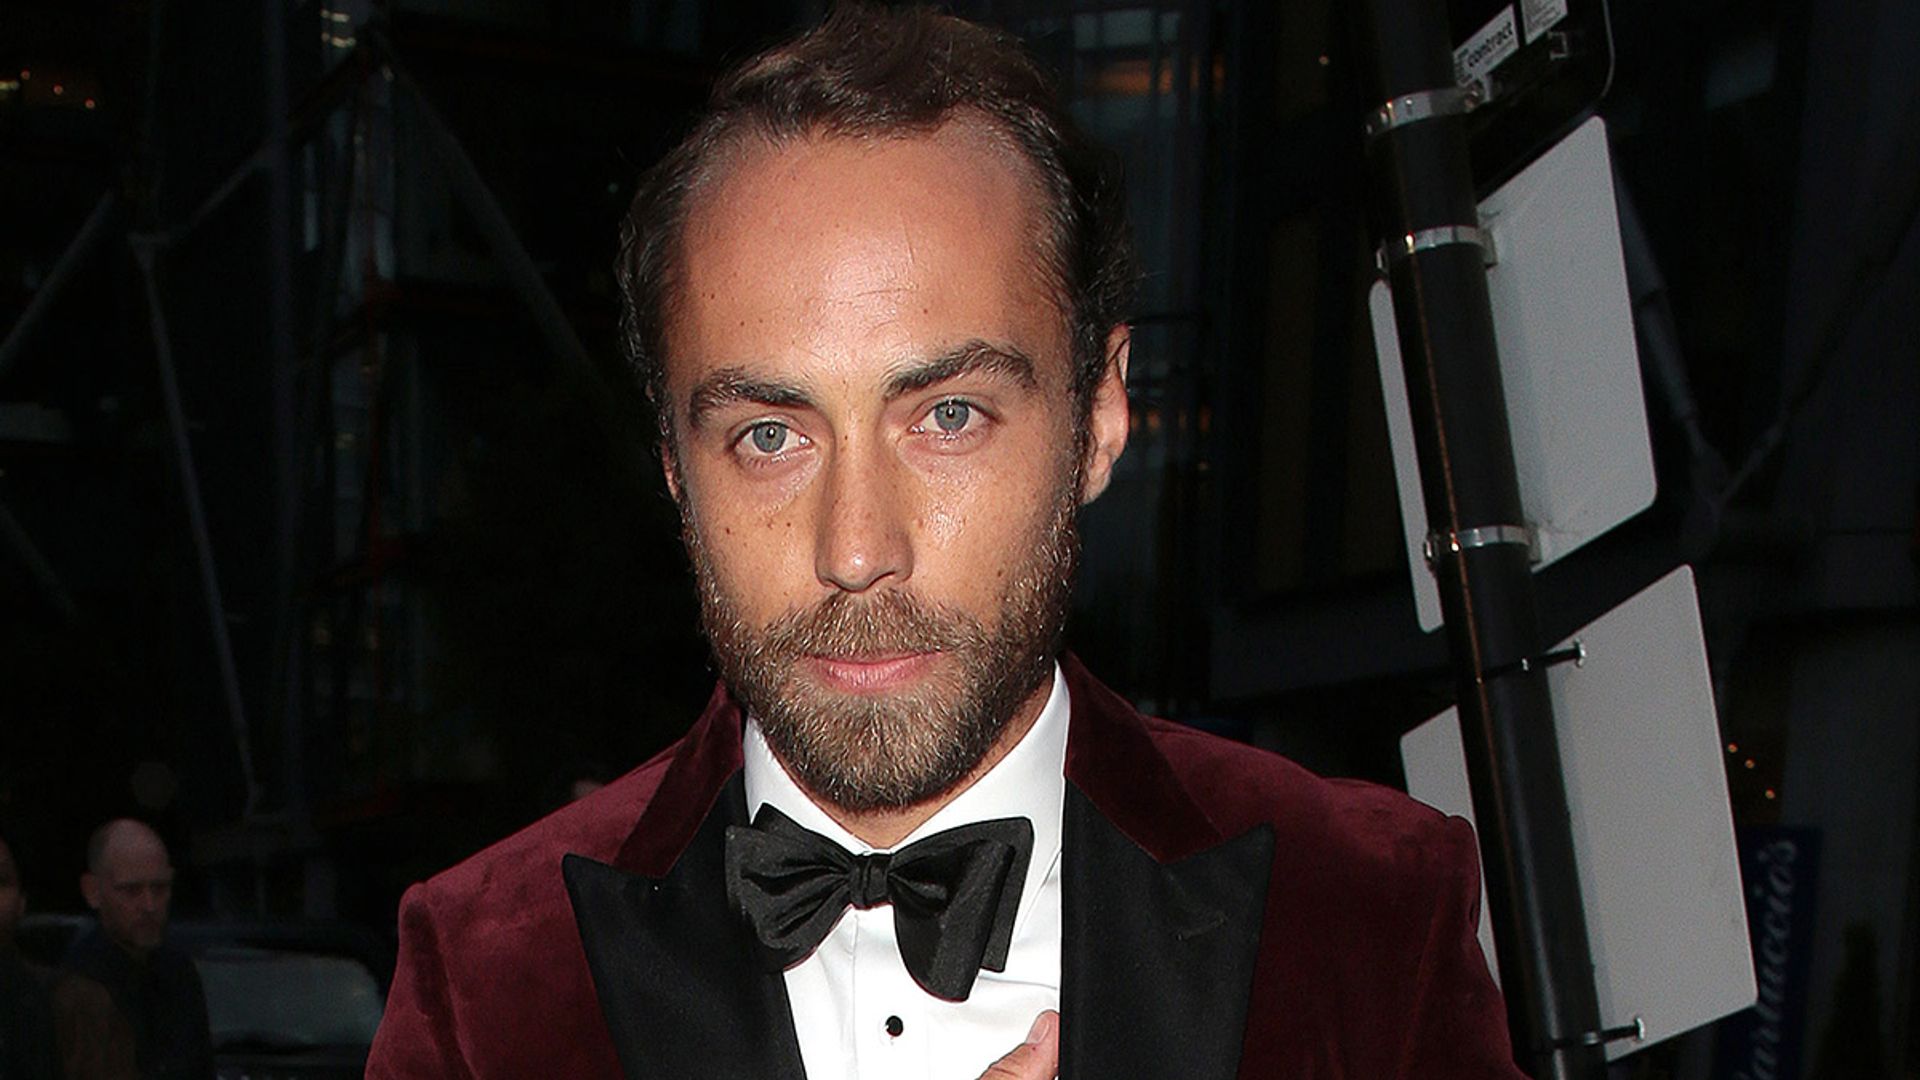 James Middleton celebrates his birthday by welcoming new family member